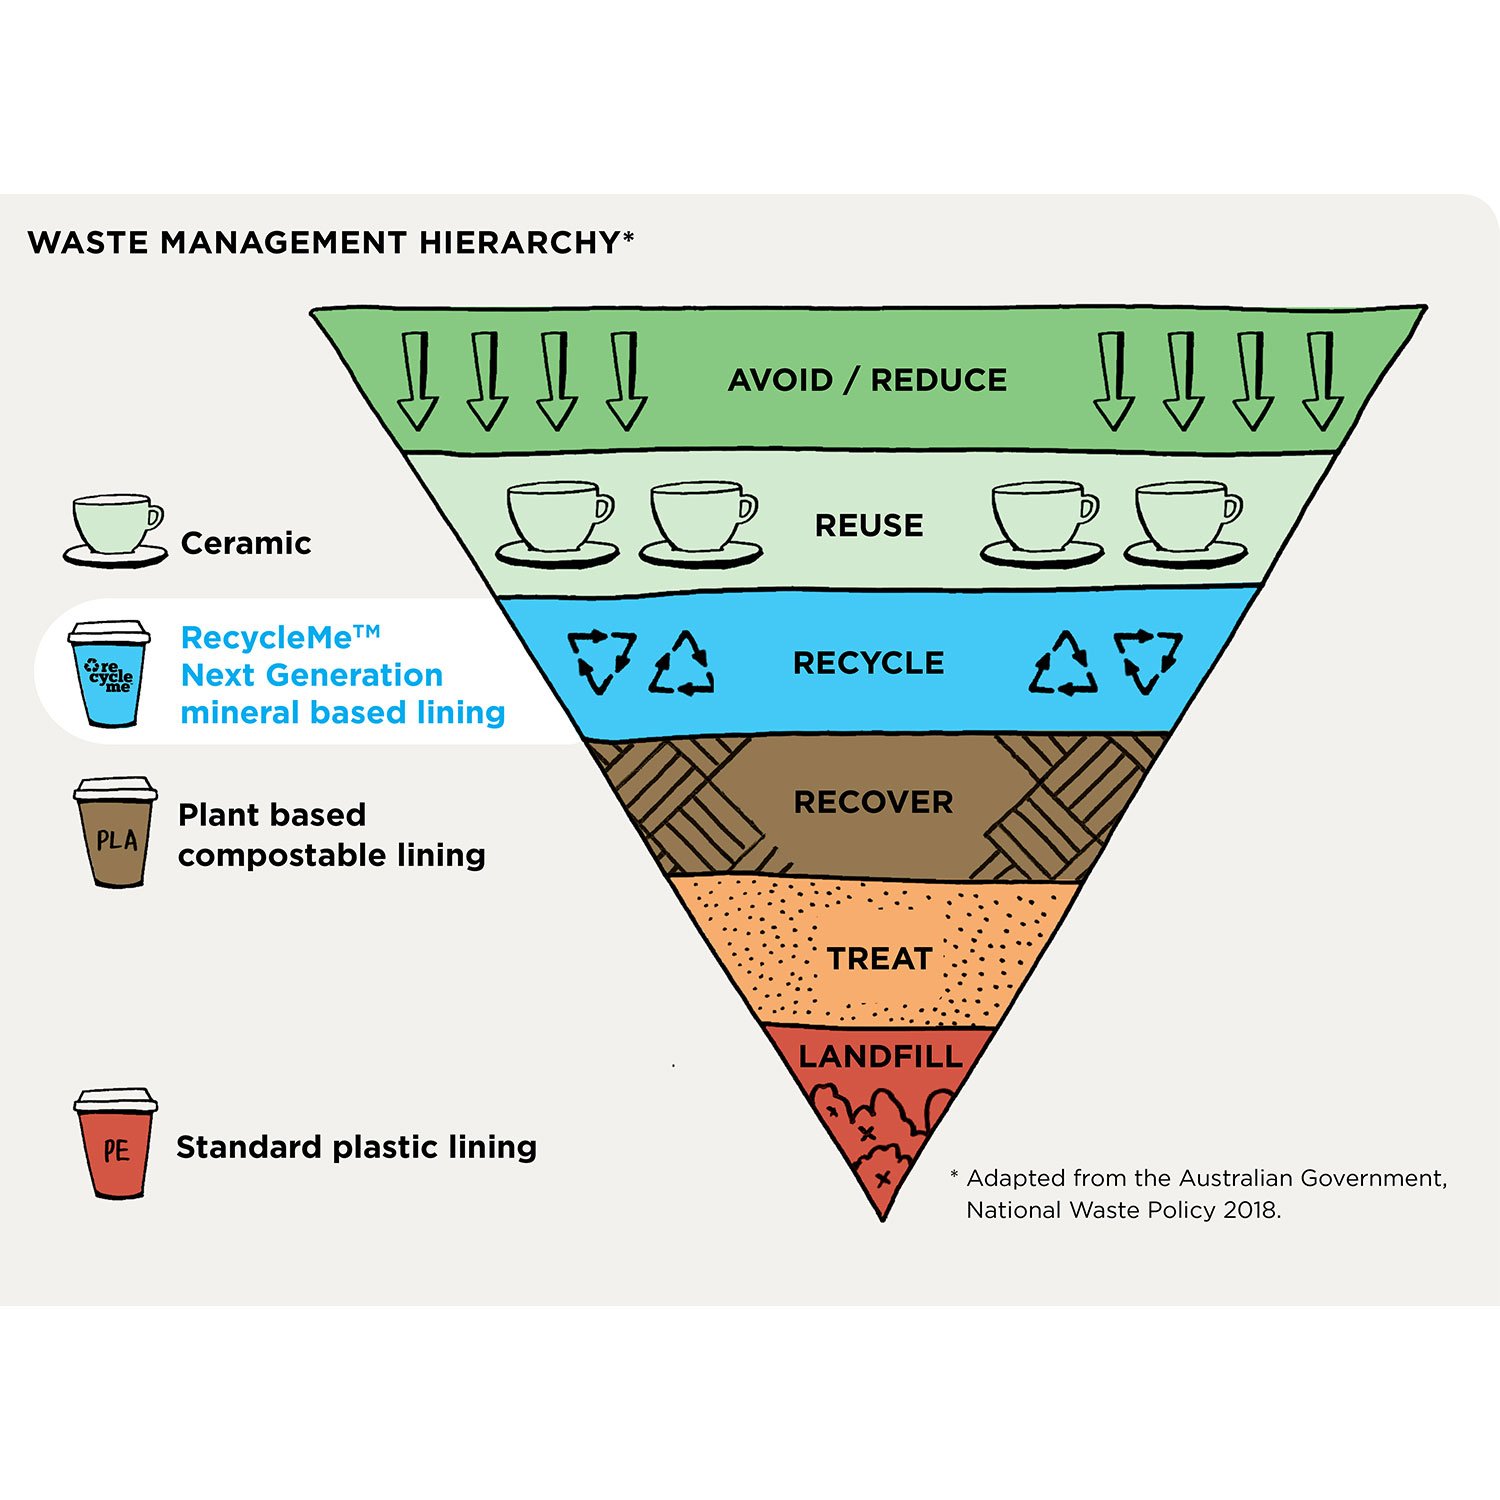 Image of the waste management hierarchy, showing recycling as the best option for takeaway cups